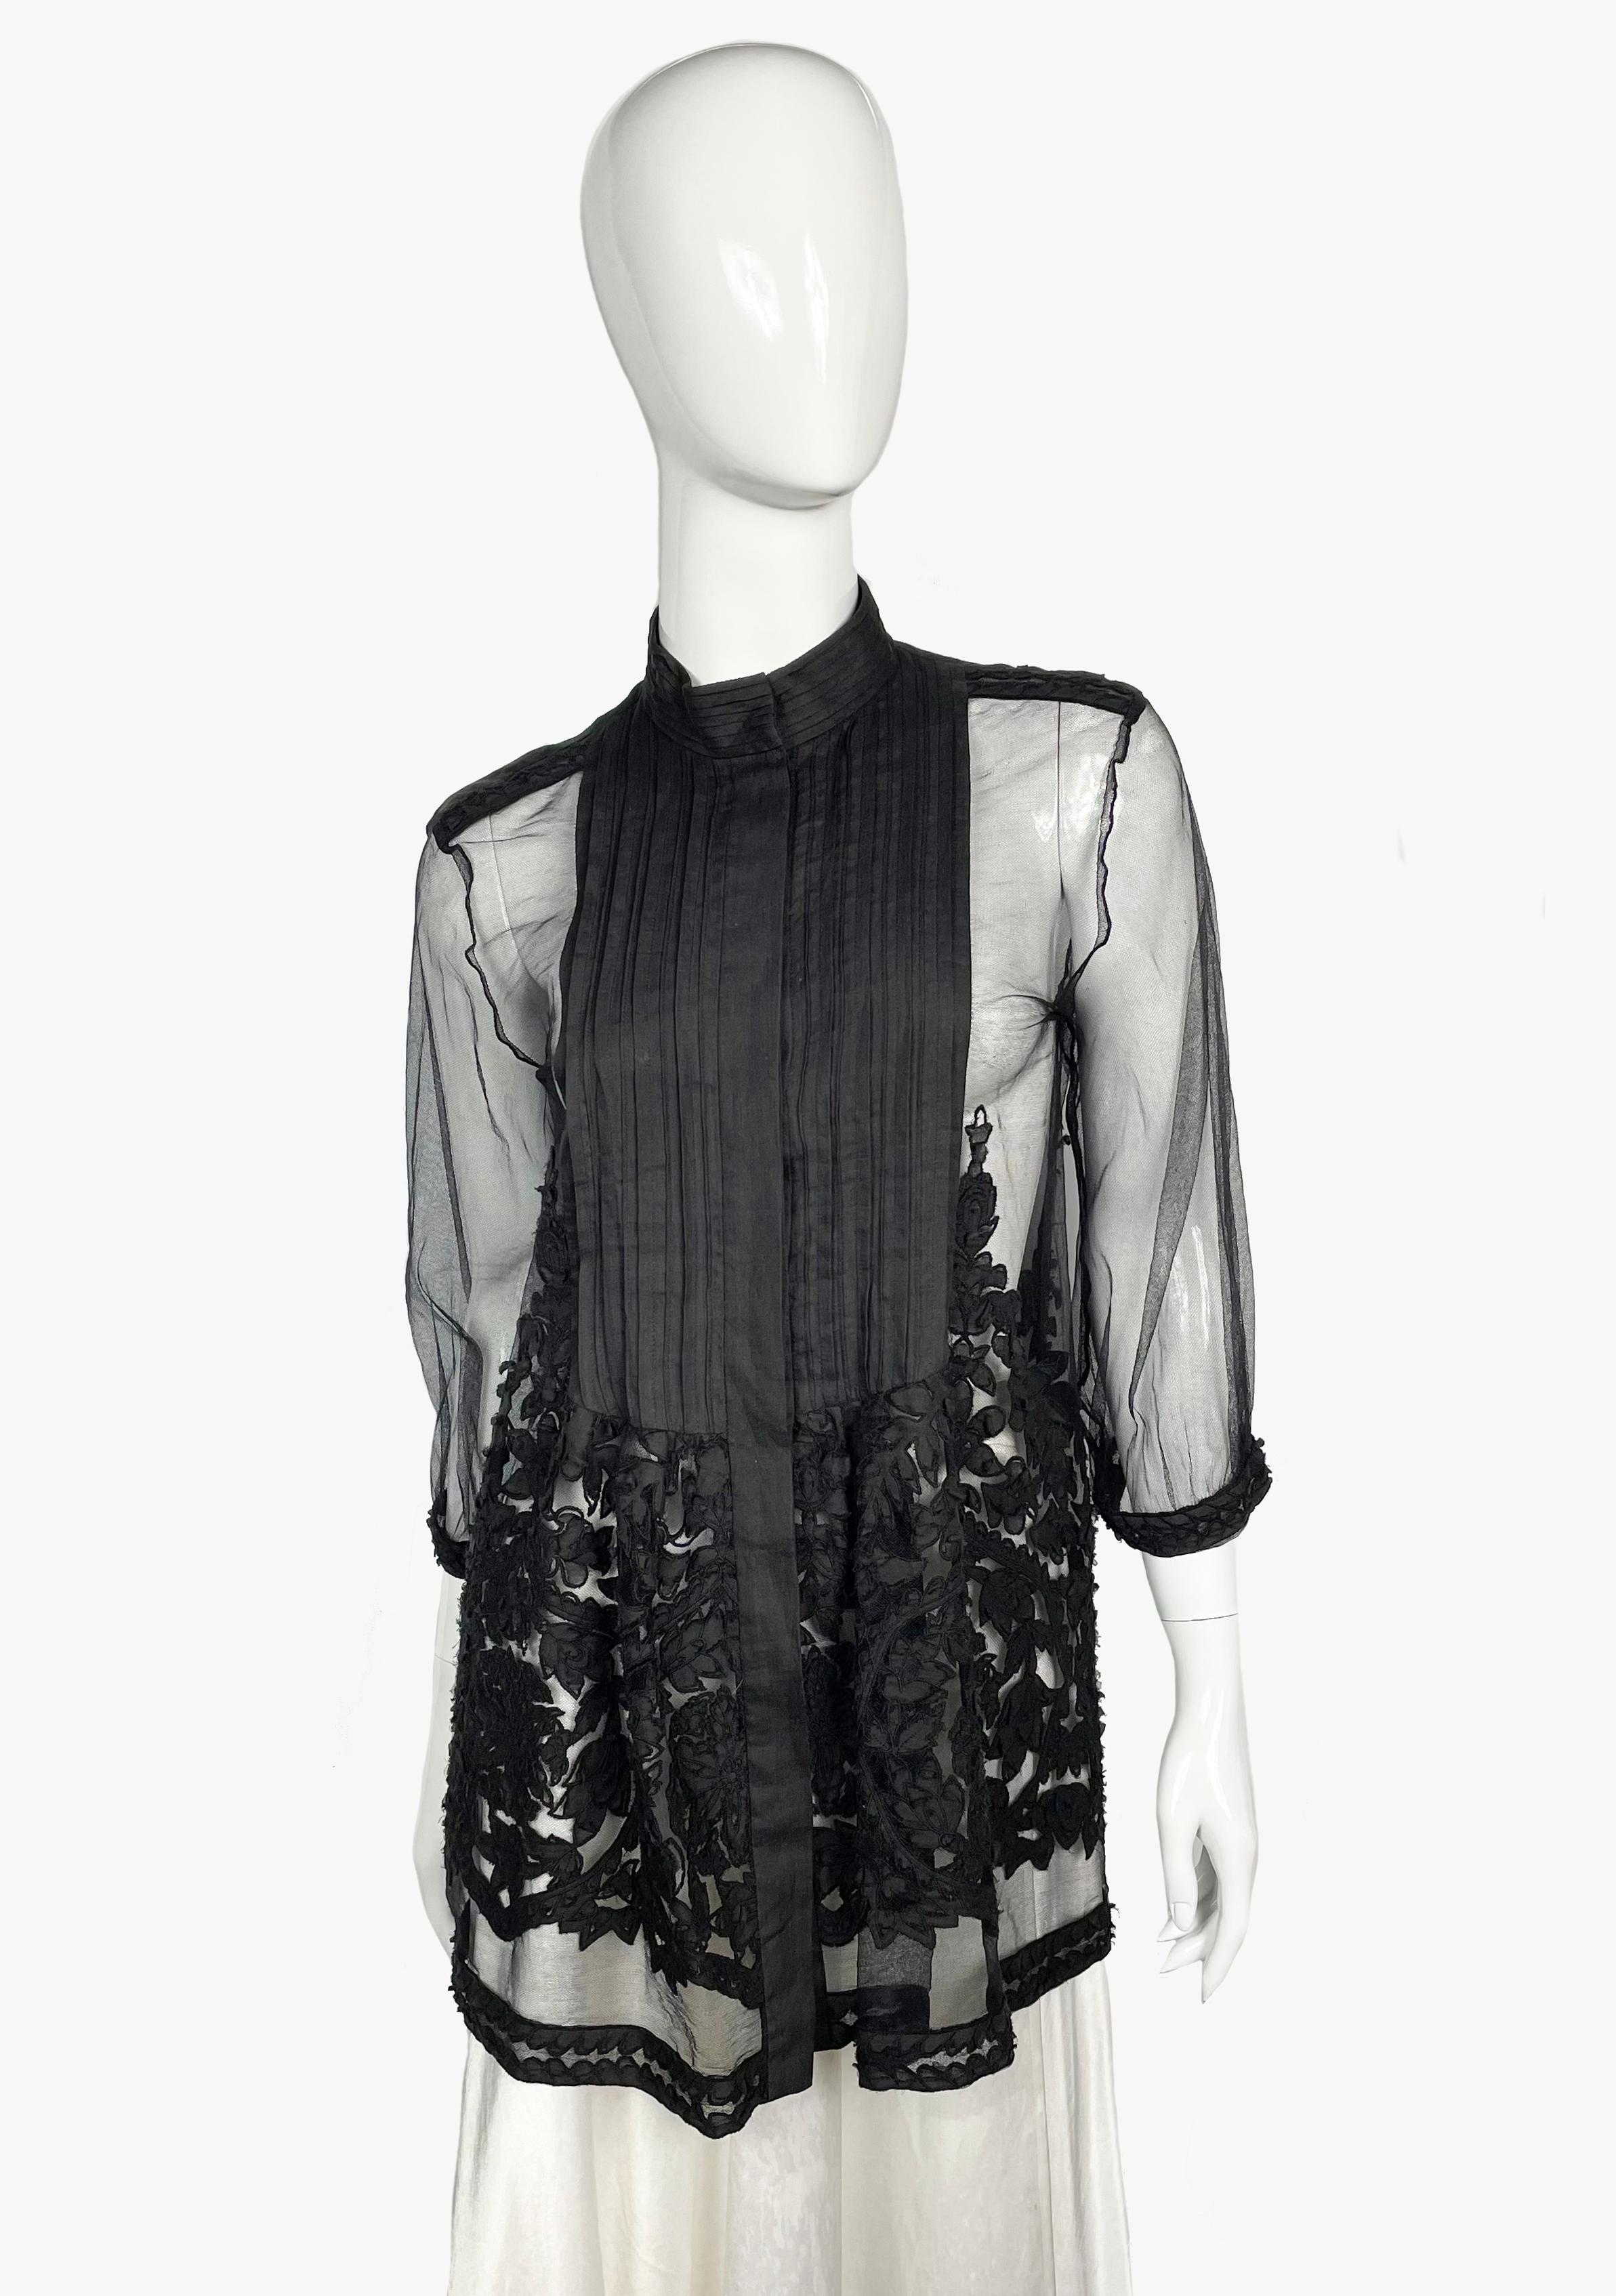 Beautiful sheer blouse by Roberto Cavalli, embellished with floral appliqué
Fastens with buttons, 3/4 sleeves
There are no tags with the composition, it feels like tulle
Period: 2000s
Size - IT40
Total length - 72 cm / 28,3''
Sleeve - 46 cm /